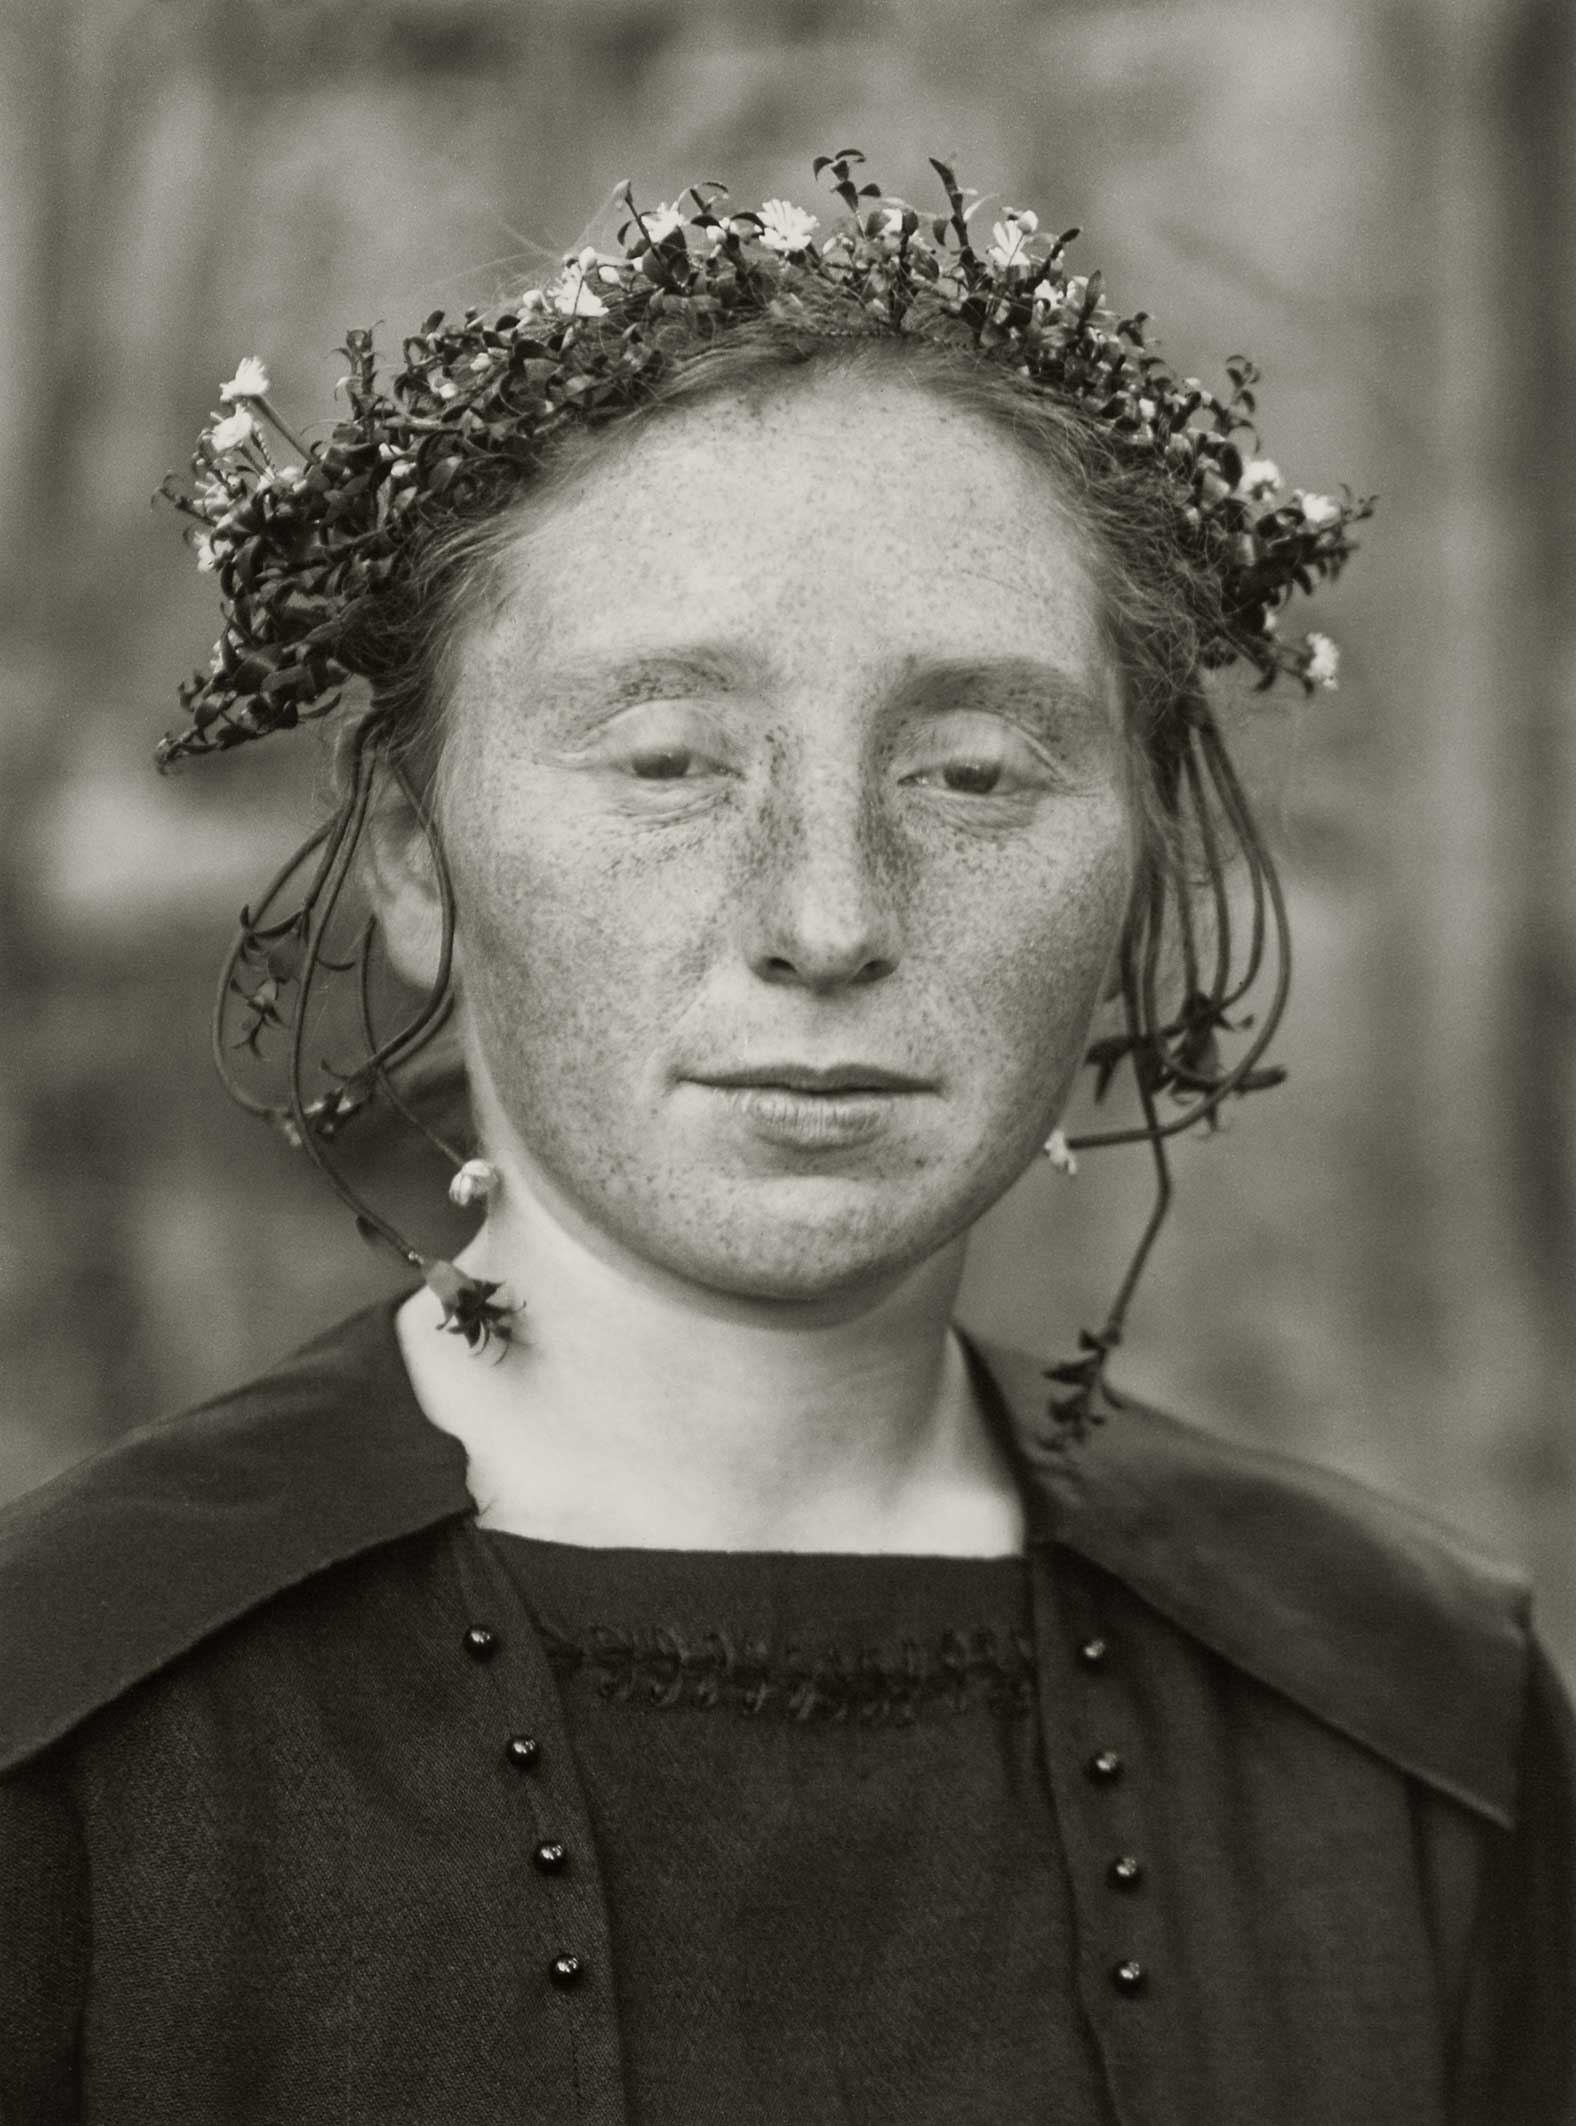 Photographs from «People of the 20th Century» - August Sander | La